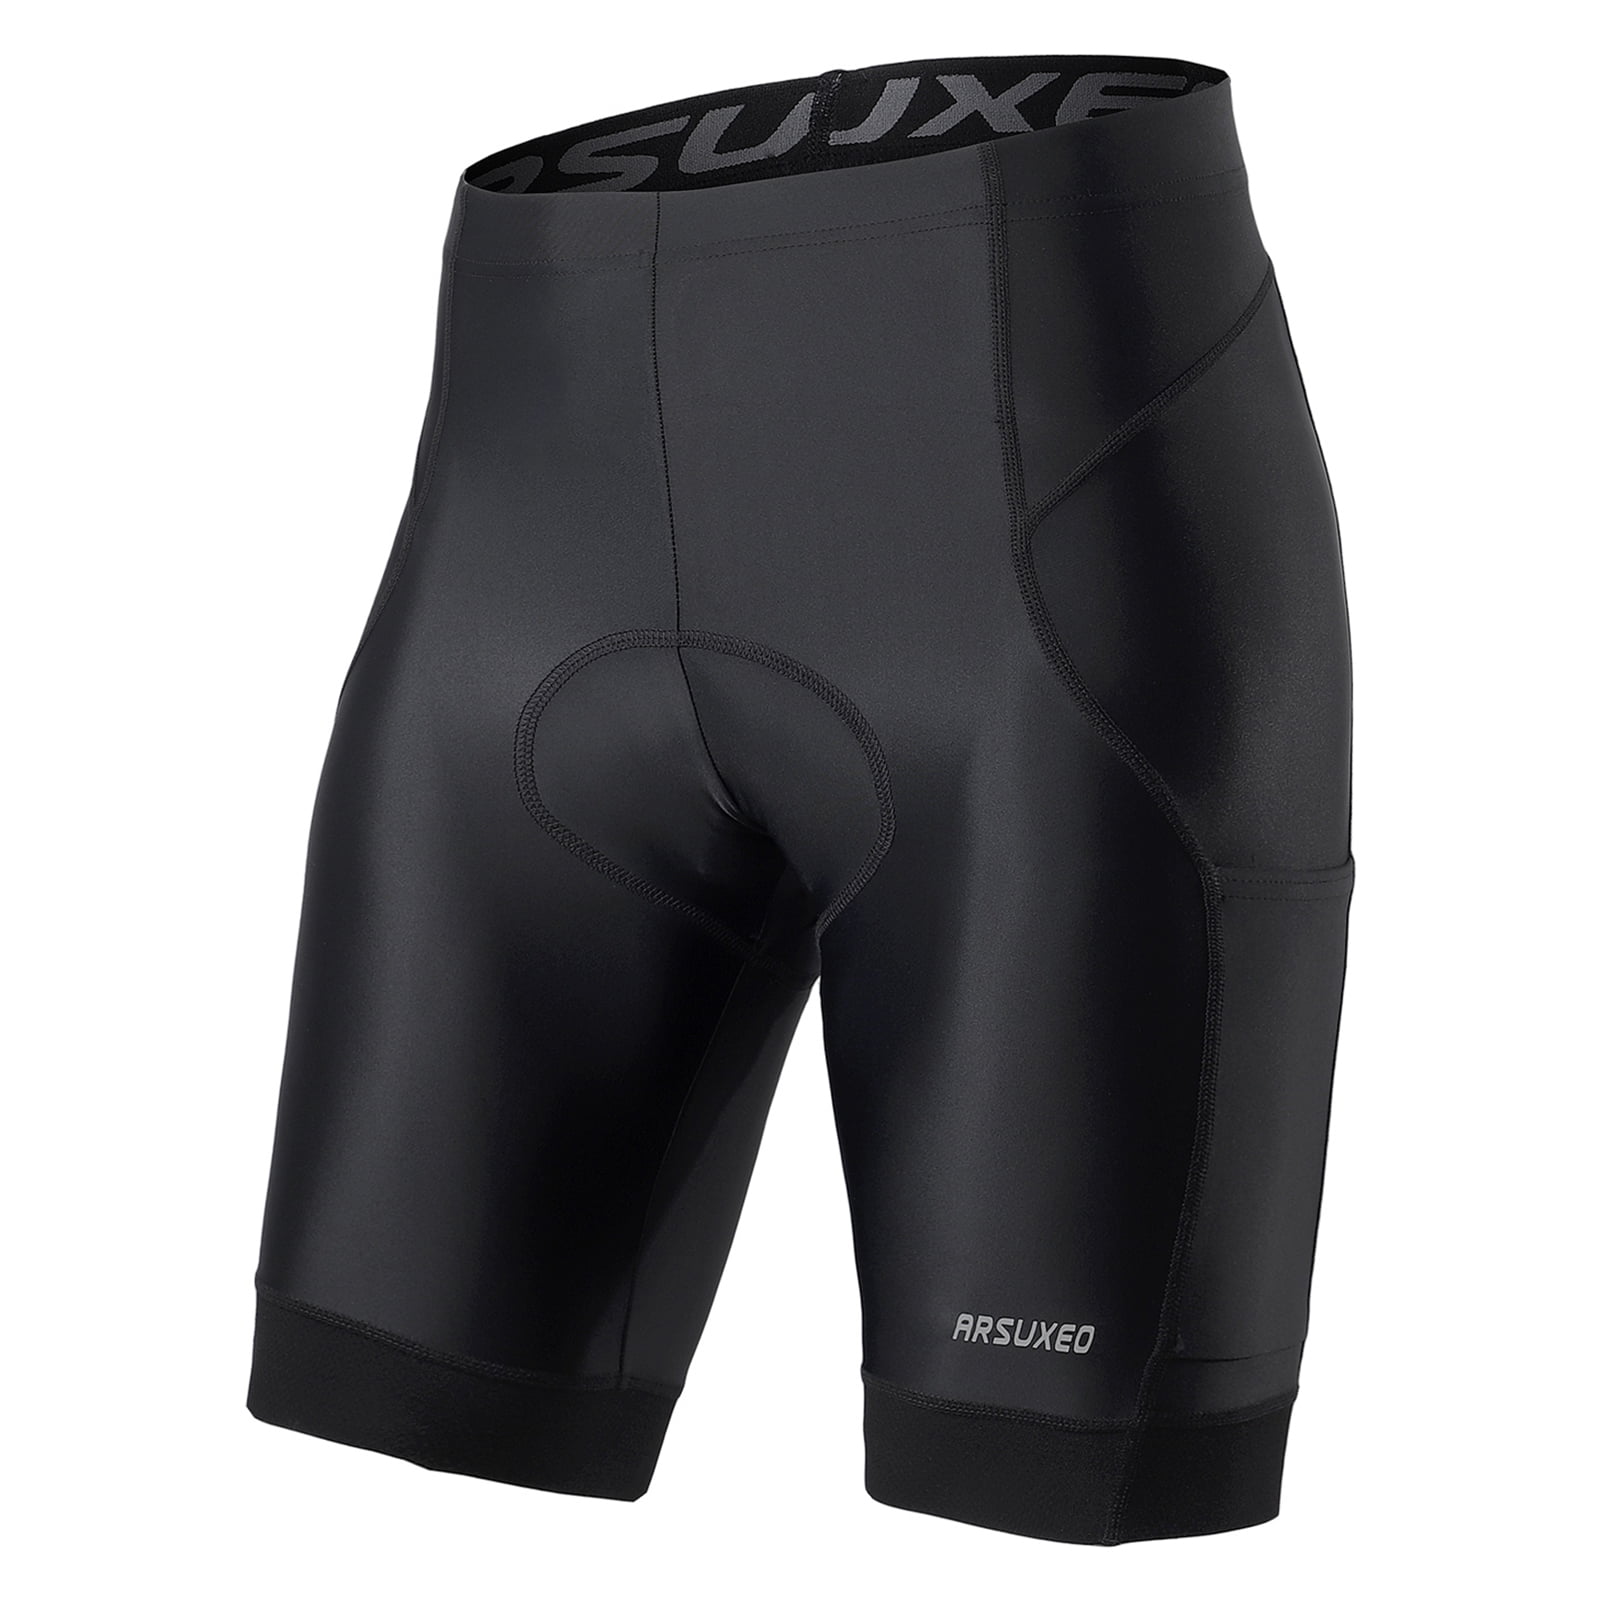 Arsuxeo Men Breathable Padded Short Quick-drying Cycling Shorts Biking ...